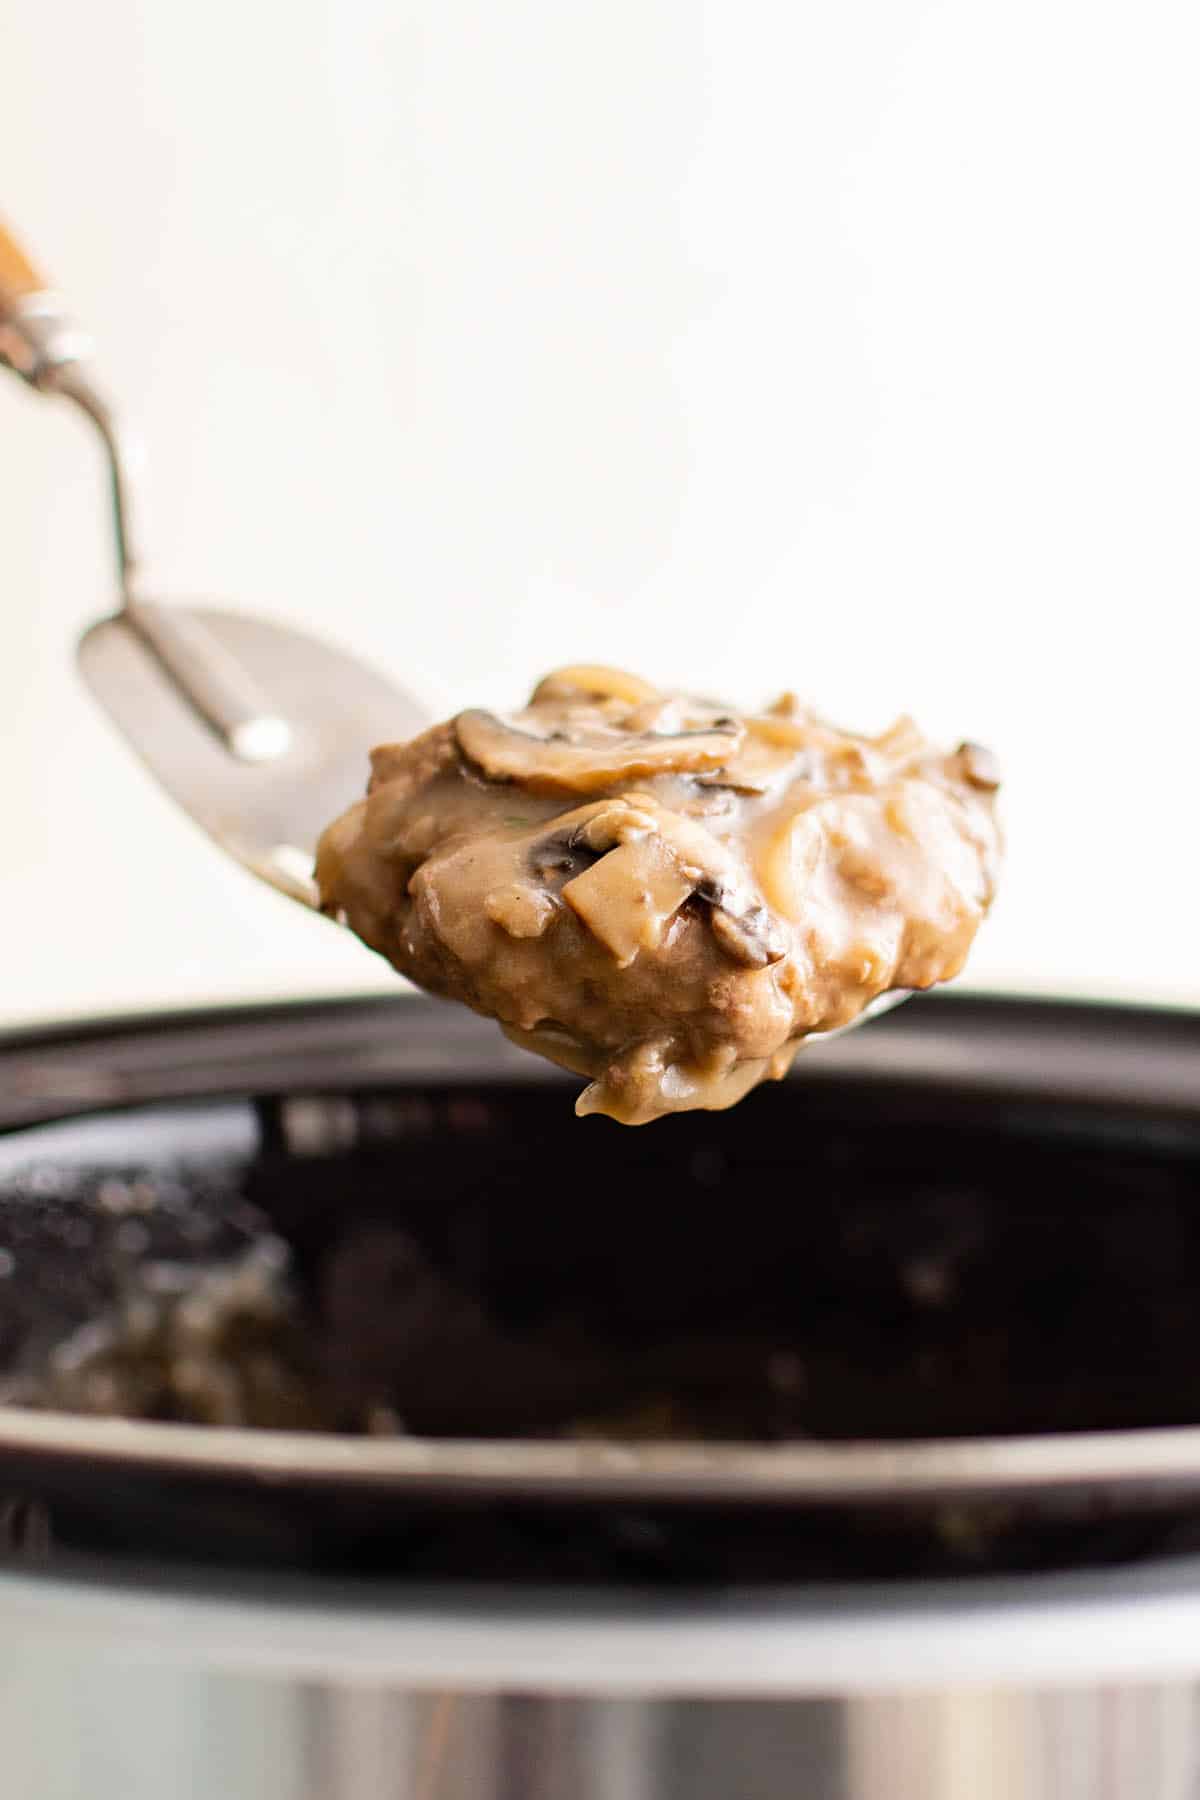 This detailed photograph depicts the fully cooked Salisbury steak patty on a spatula suspended above the crockpot. The sauce glistens in the light with the sliced onions and mushrooms on top of the patty. 